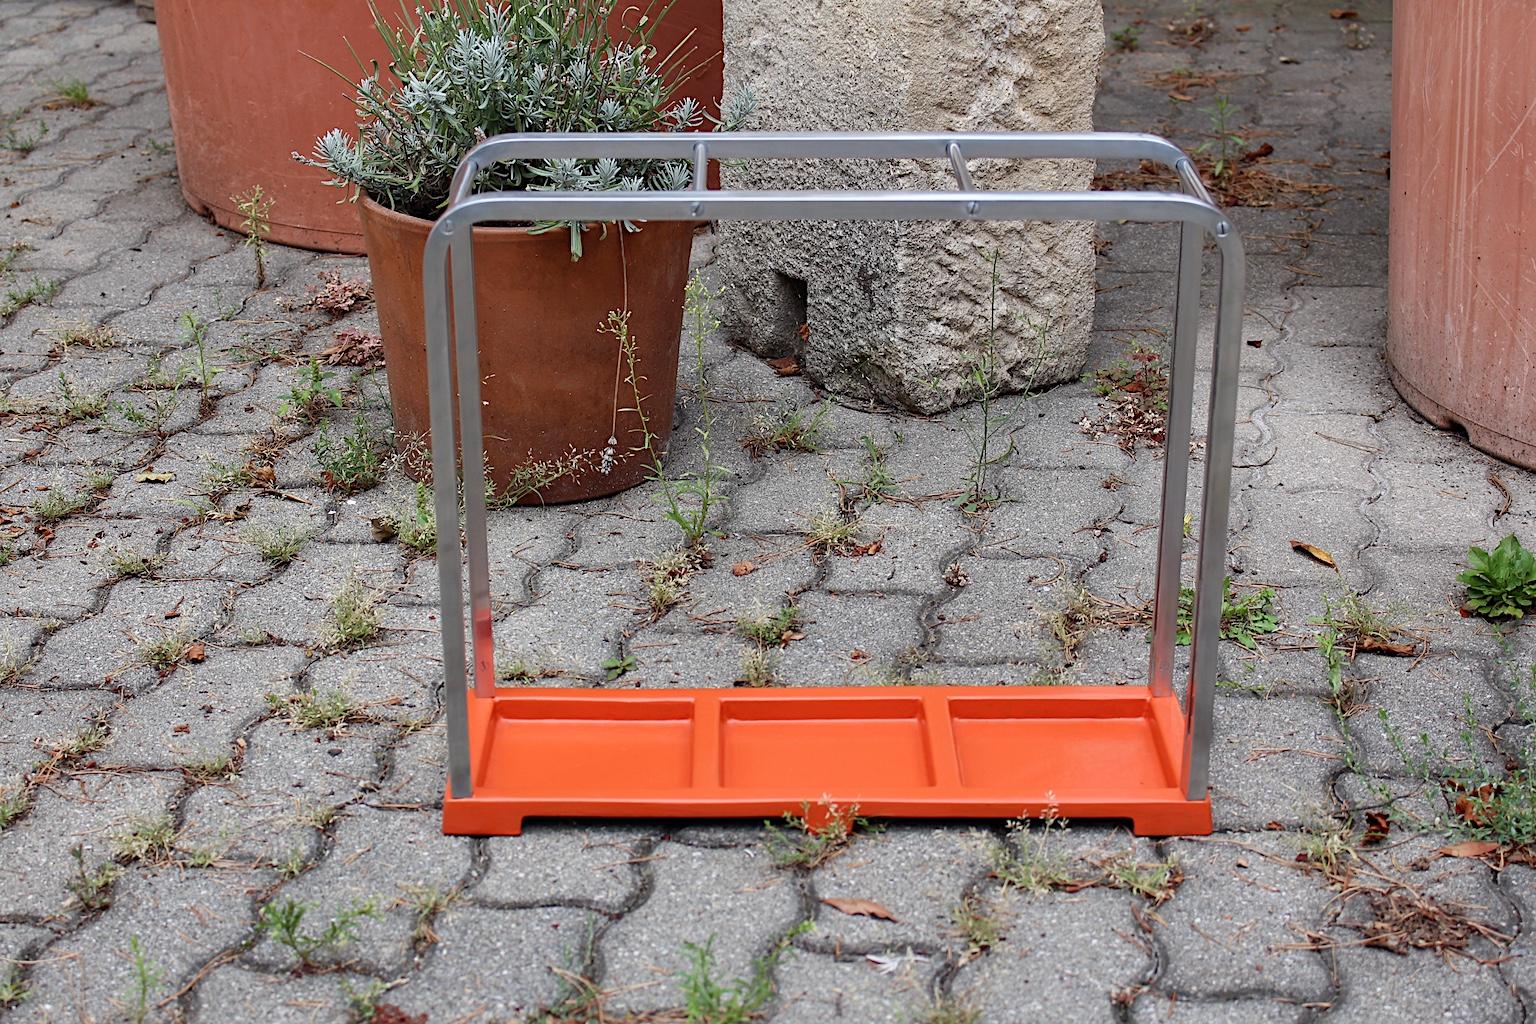 Bauhaus Art Deco Vintage Red Silver Aluminum Umbrella Stand, 1930s, Germany For Sale 14